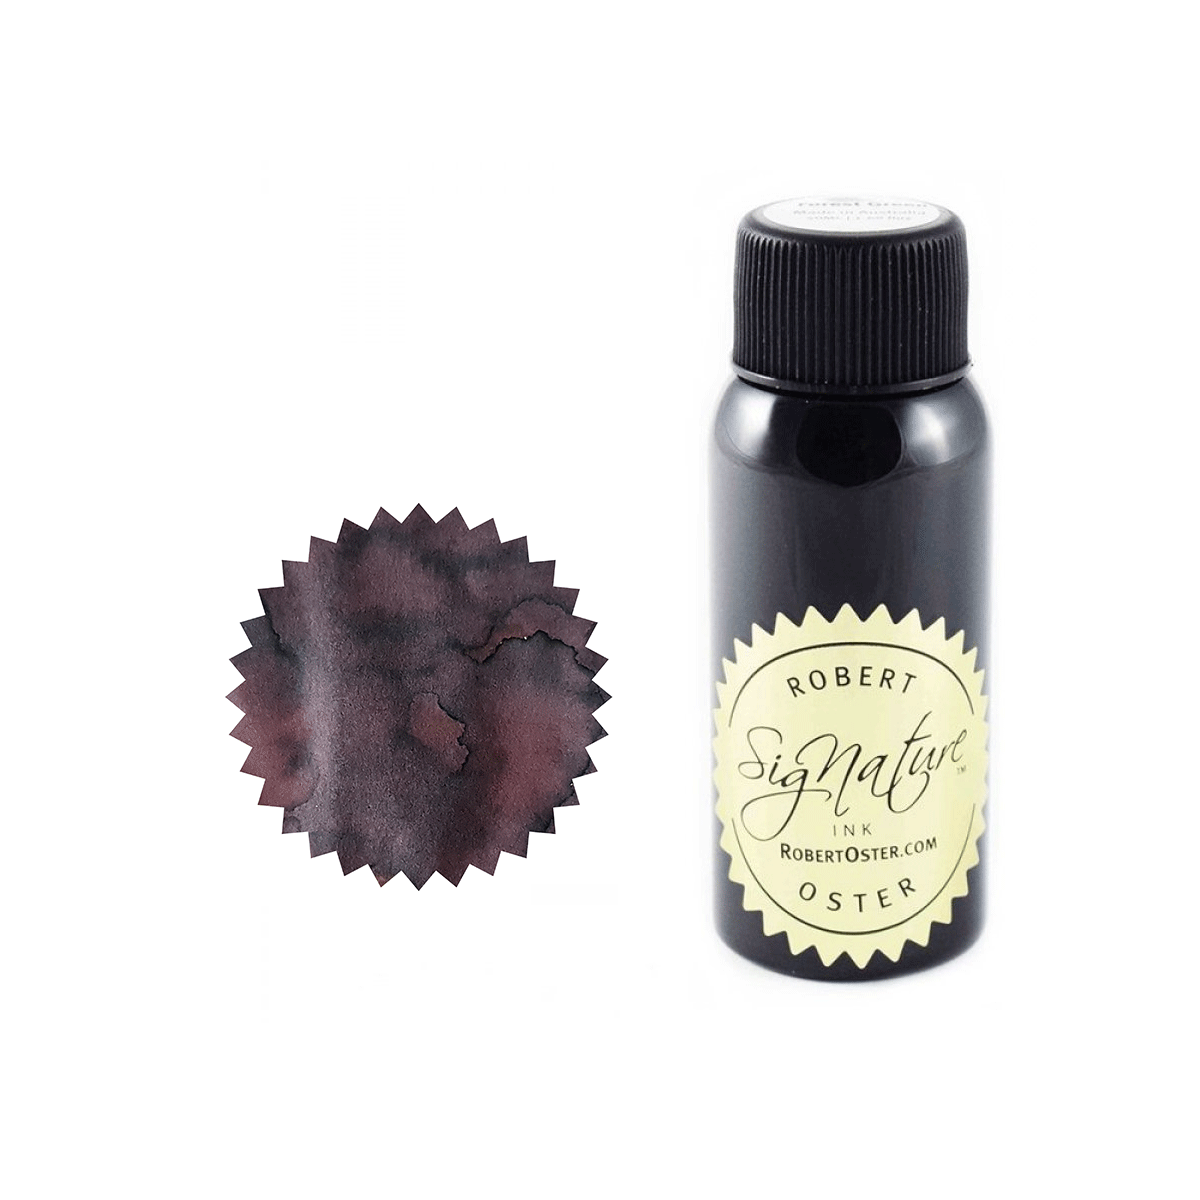 Robert Oster Signature Ink Bottle Dark Chocolate - Pencraft the boutique